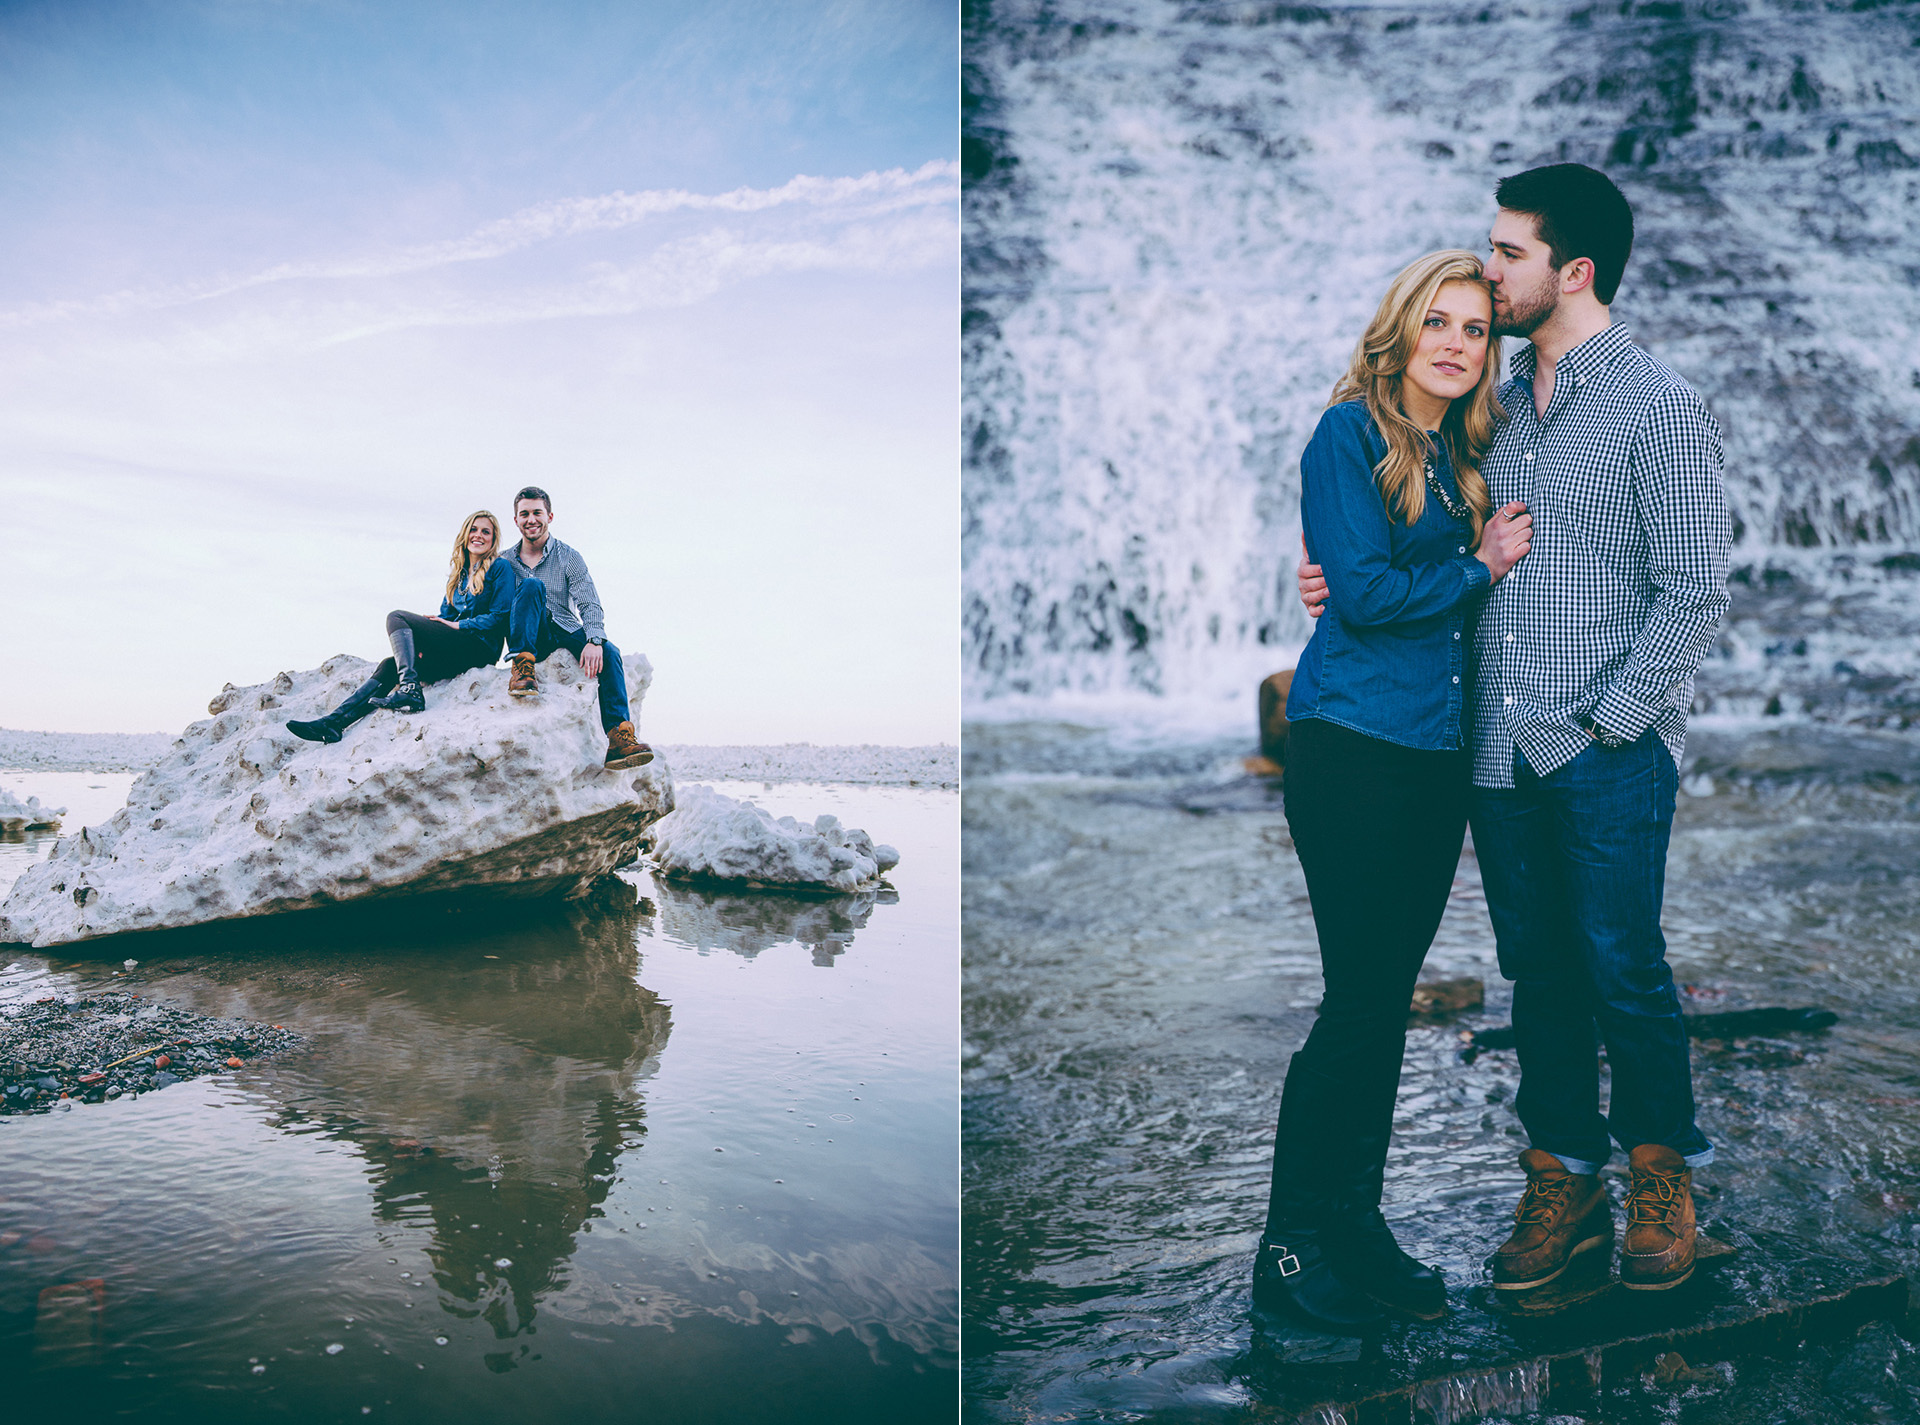 Winter Engagement Session in Bay Village - Too Much Awesomeness - Cleveland Wedding Photographer 15.jpg